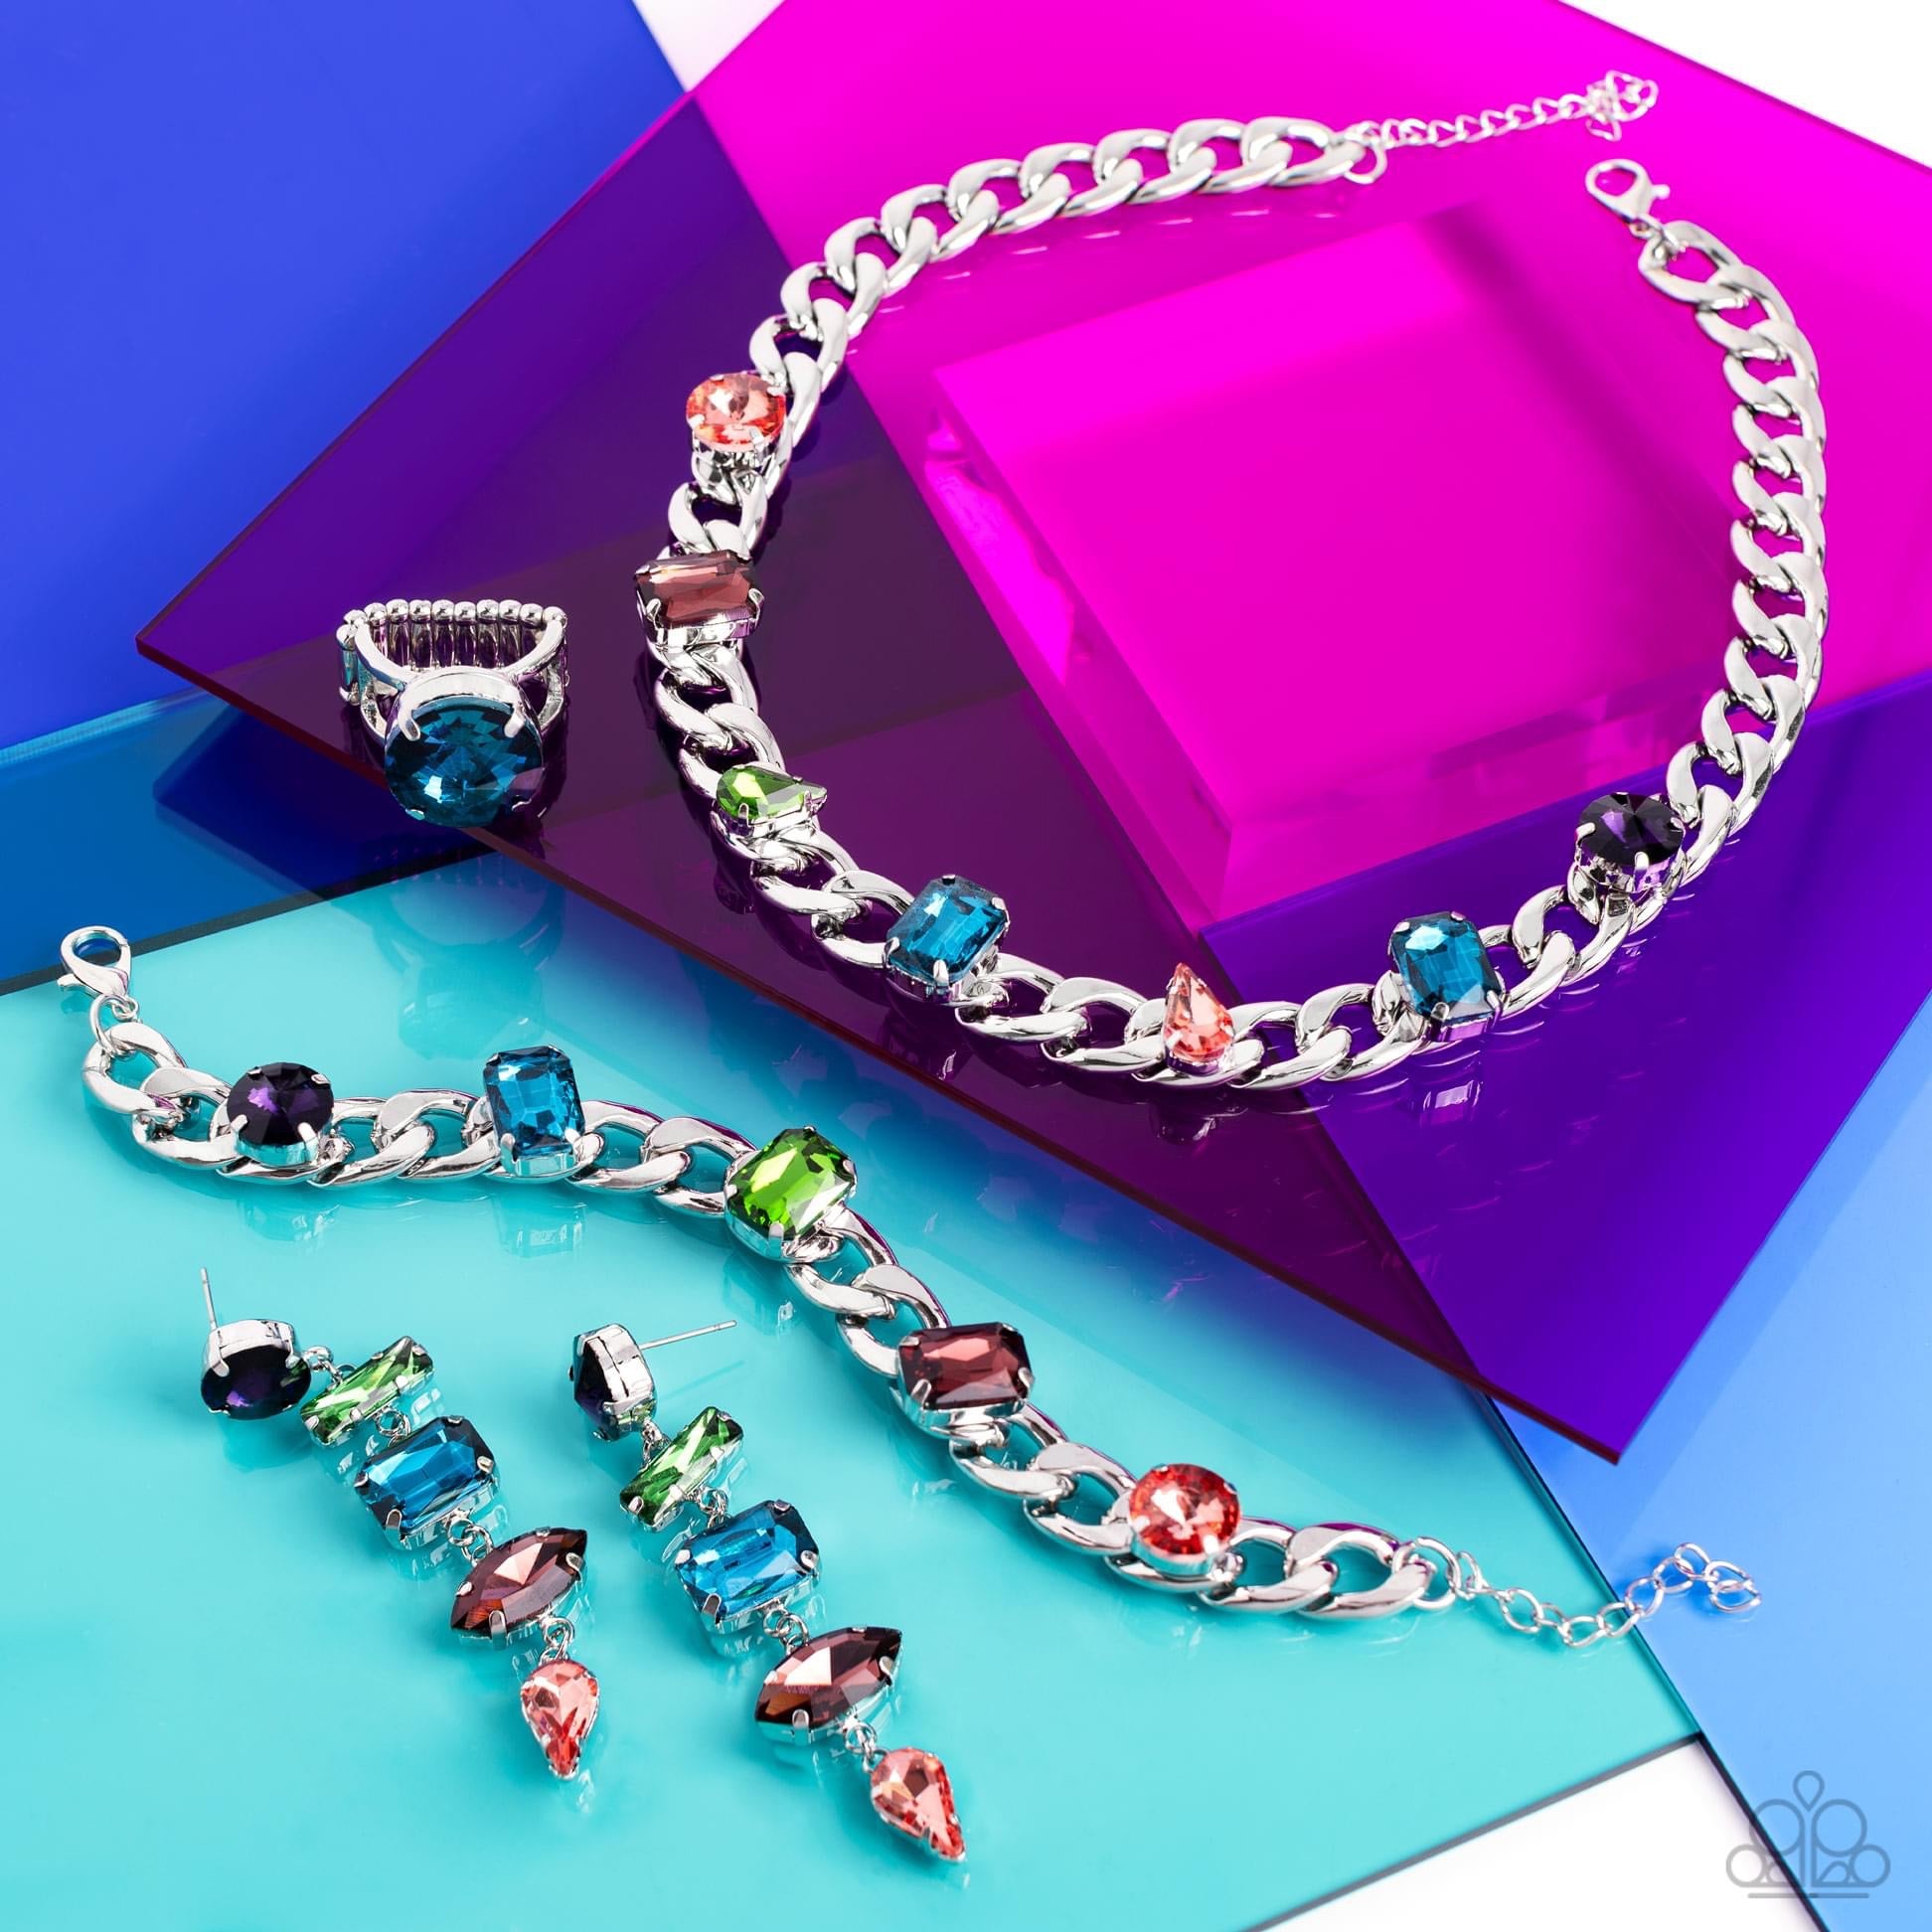 Paparazzi Accessories Magnificent Musings - Complete Trend Blend - August 2023 The Magnificent Musings Collection features bold statement pieces and edgy designs. Reveling in sassy, unapologetic fashion, Magnificent Musings mavens confidently express them